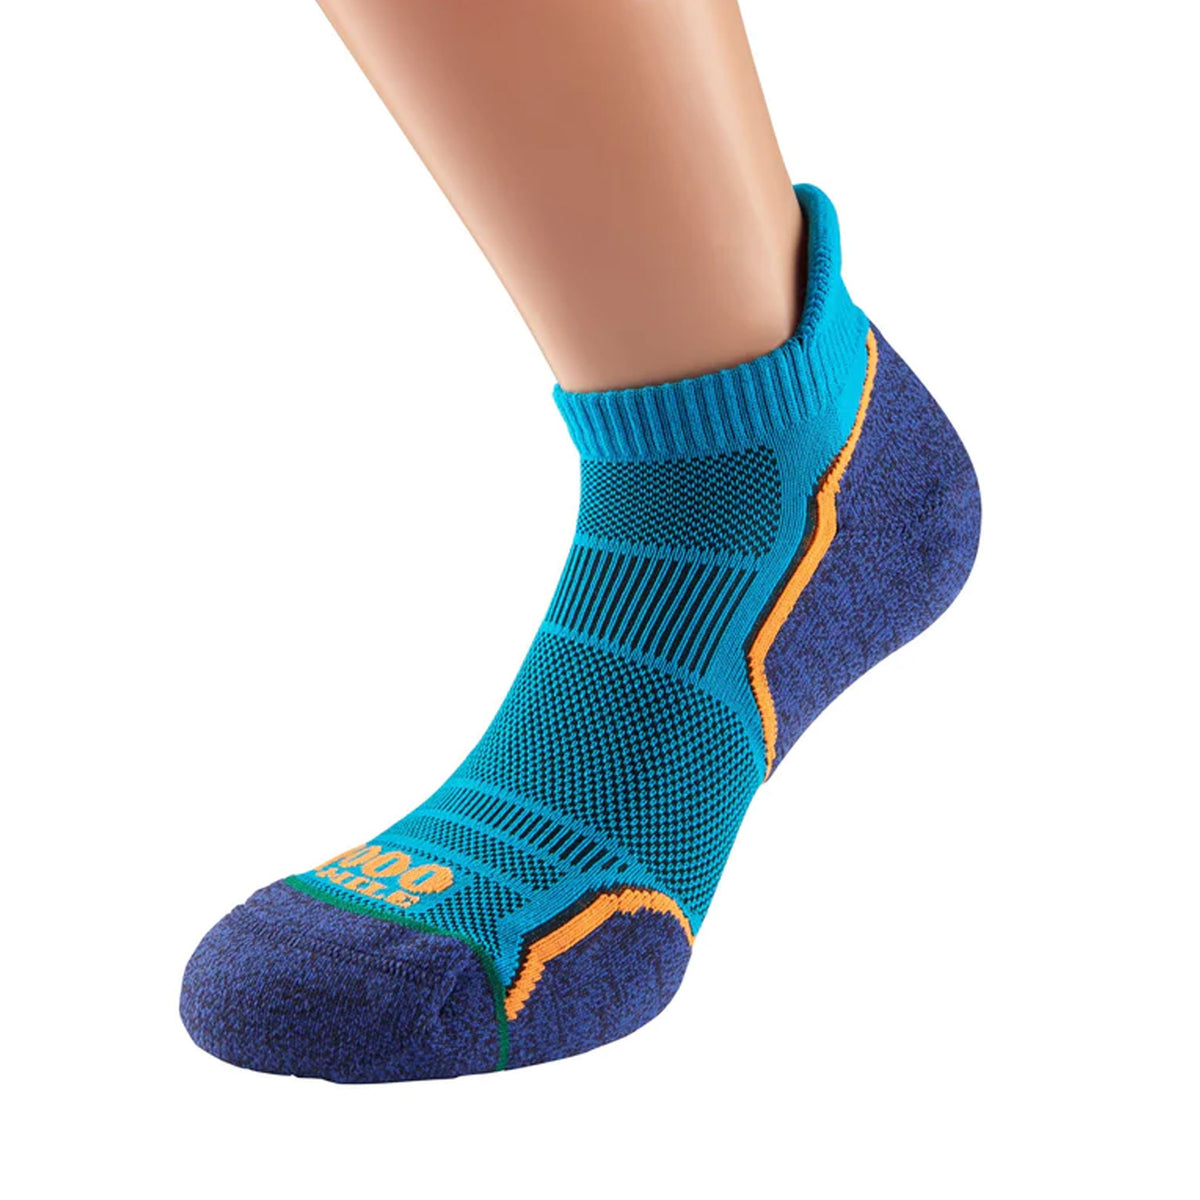 Thousand Mile Run Socklet Twinpack: Kingfisher/Navy